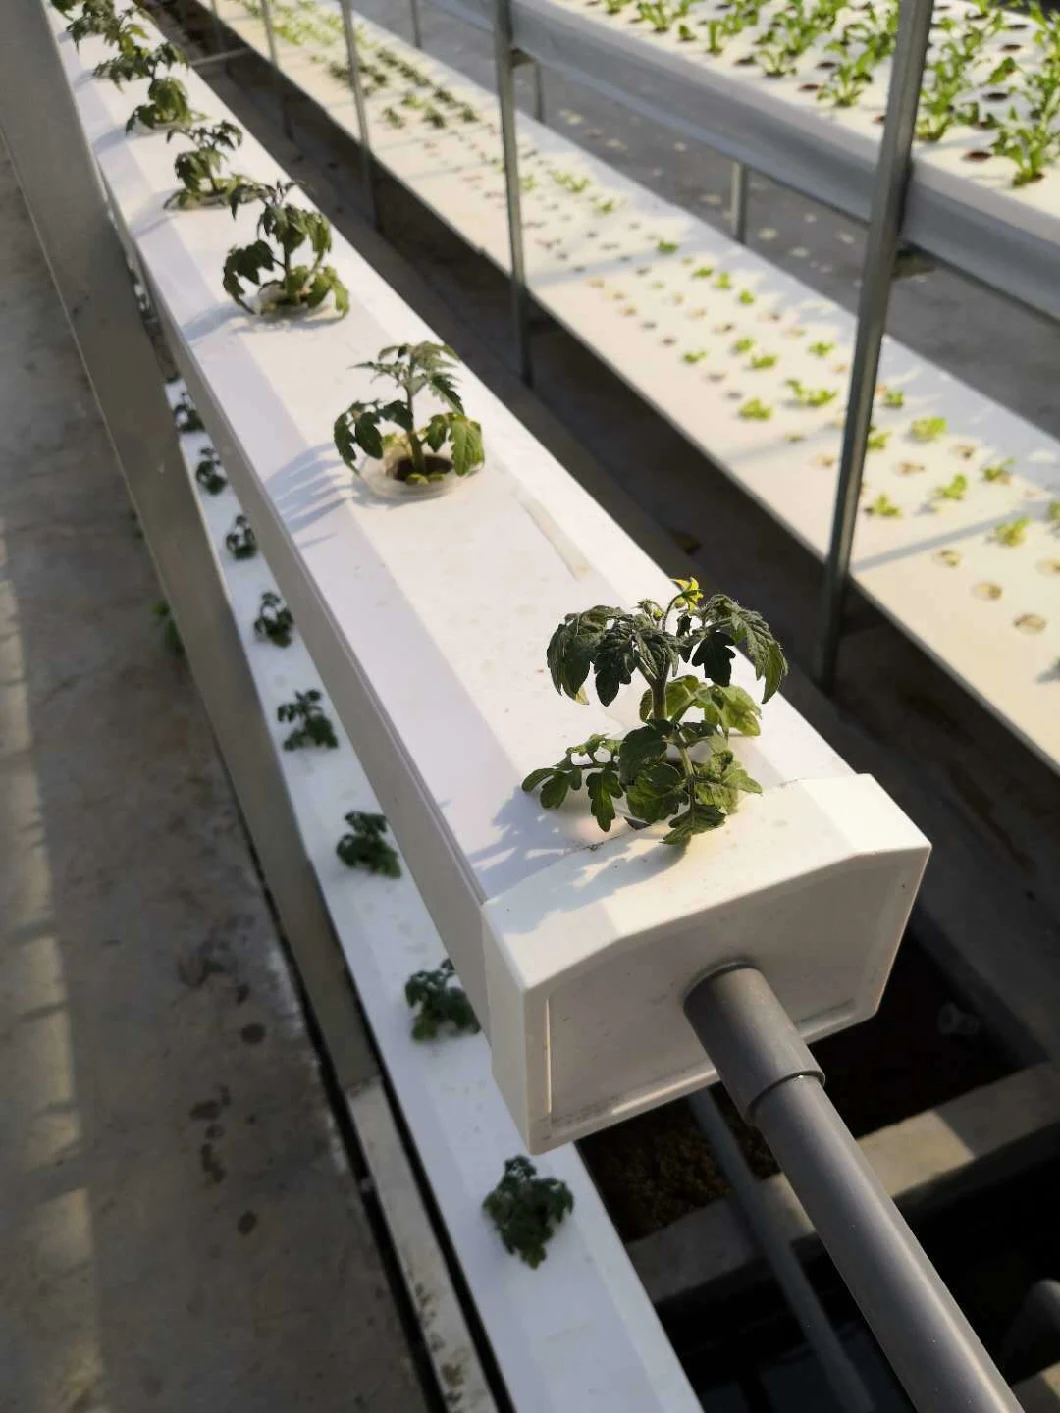 High Quality Commercial Greenhouse Hydroponic Growing Systems for Sale